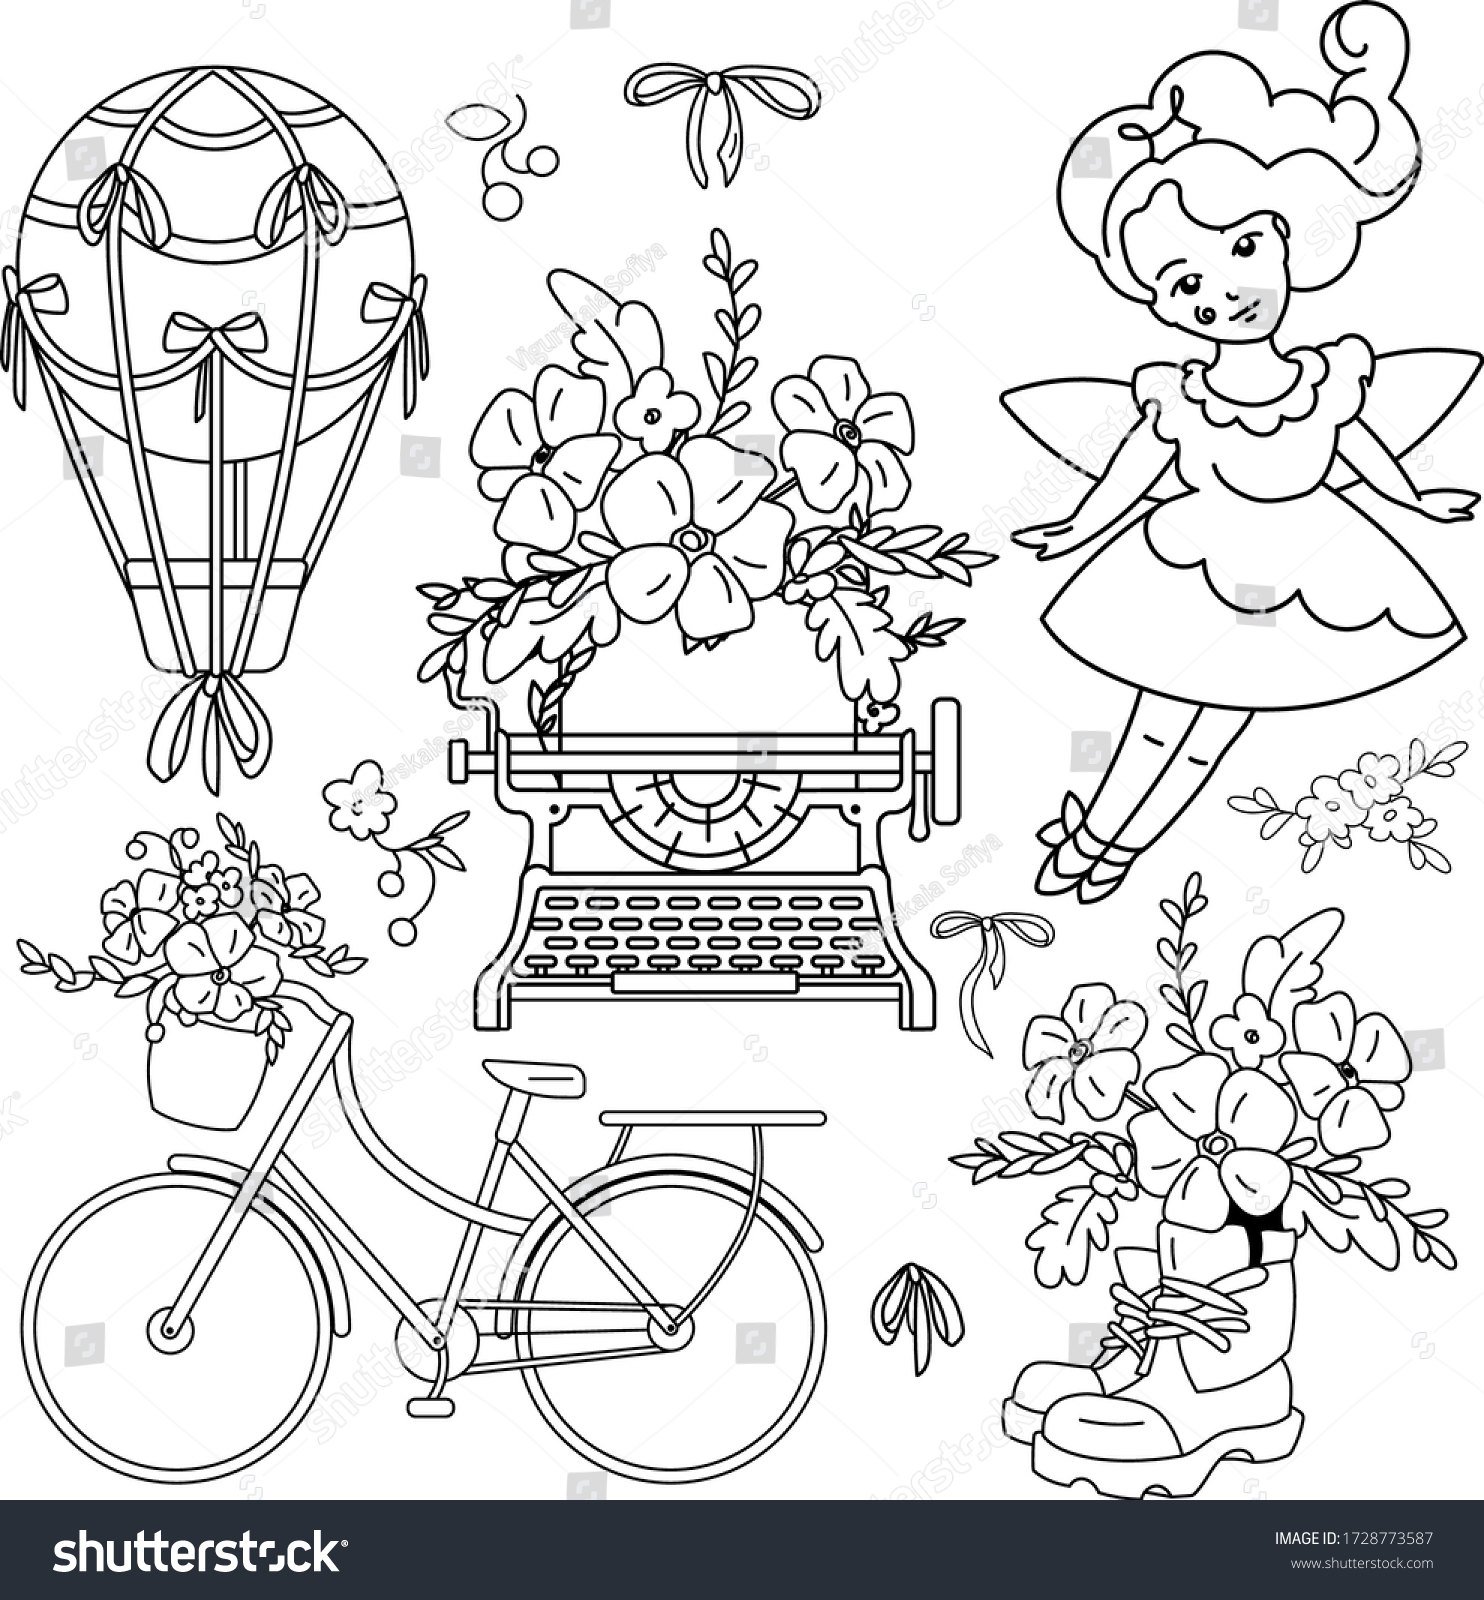 SVG of Single line, outline illustration, sketch. Isolated elements: enchantress princess, typewriter, air hot balloon, on white background, boots,  flowers. Used for engraving, embossing, coloring page svg